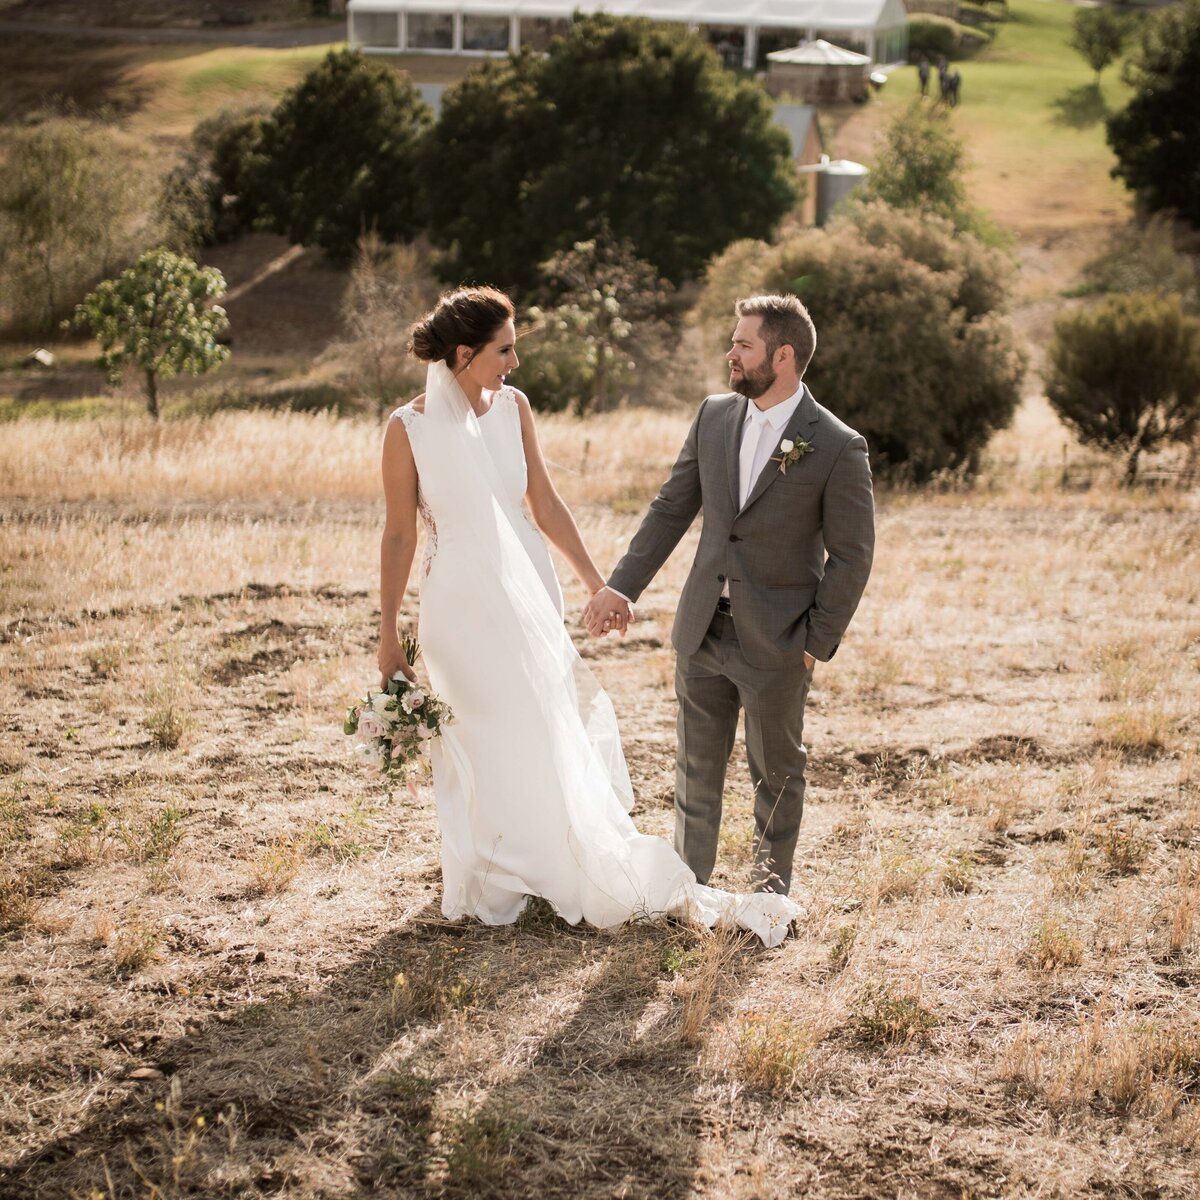 S&T-Paxton-Wines-Rexvil-Photography-Adelaide-Wedding-Photographer-194